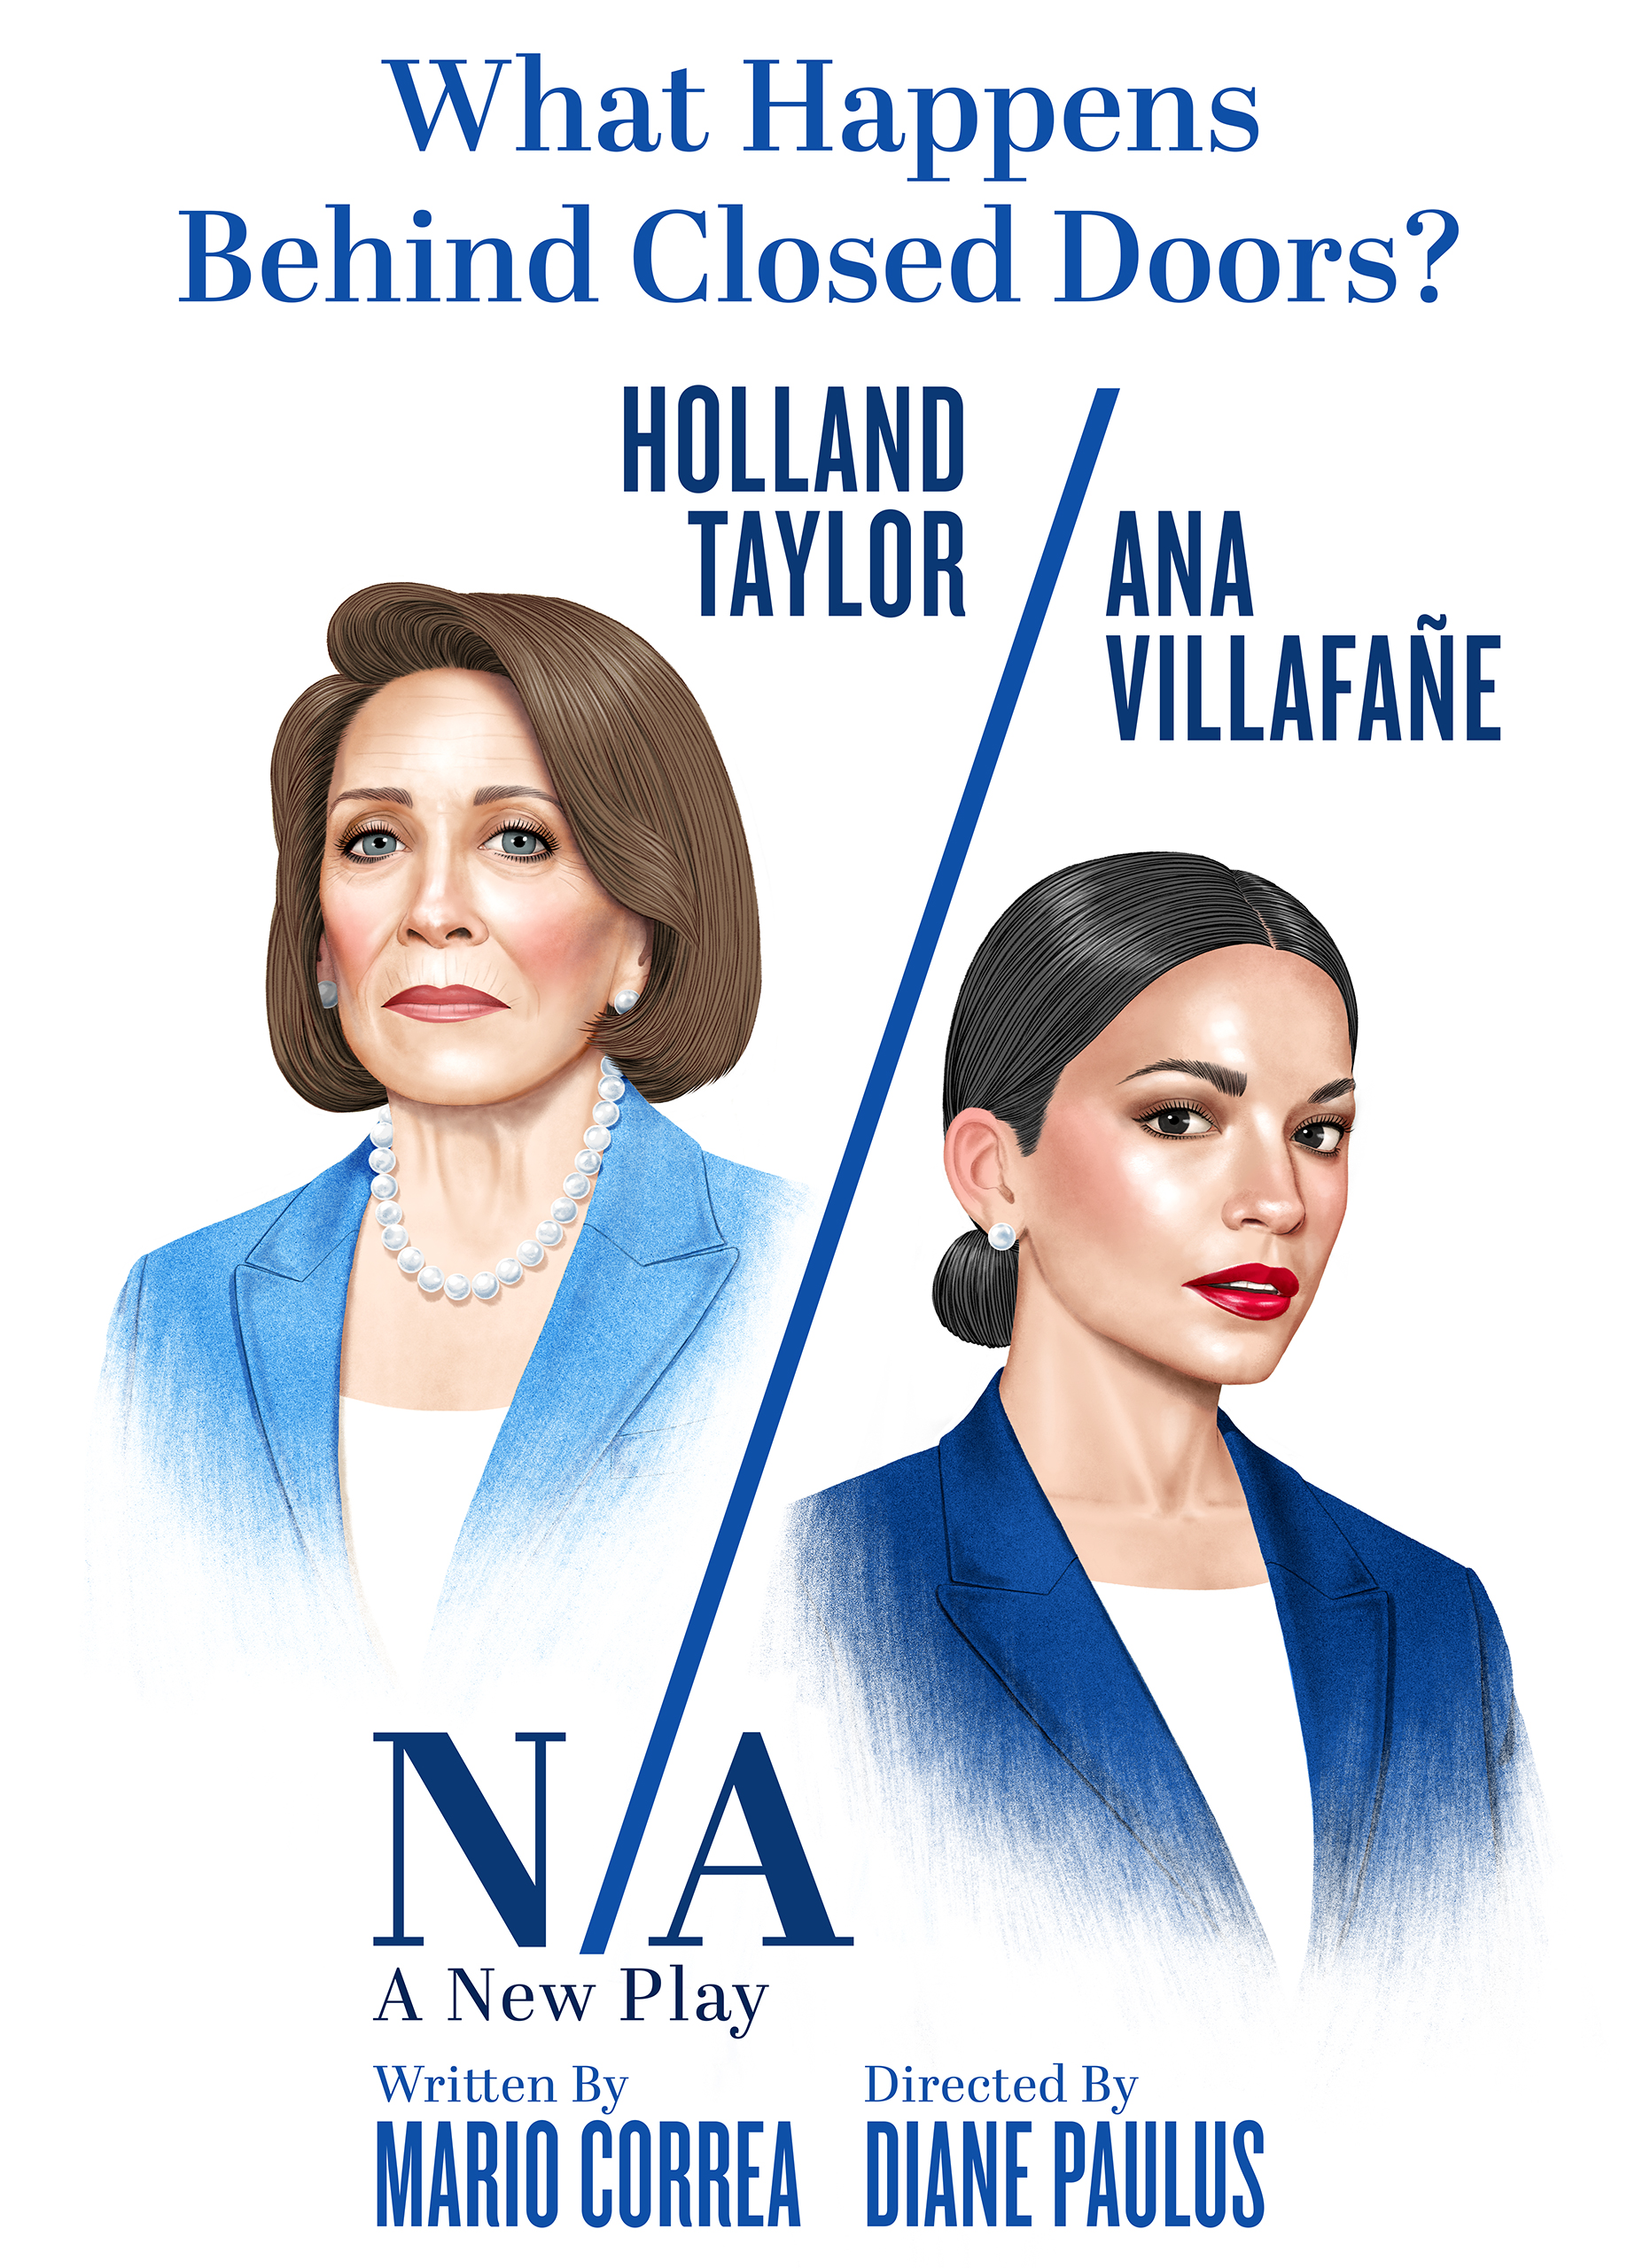 Image: What Happens Behind Closed Doors? N/A starring Holland Taylor as N (Nancy Pelosi) and Ana Villafañe as A (Alexandria Ocasio-Cortez). A New Play written by Mario Correa and directed by Diane Paulus